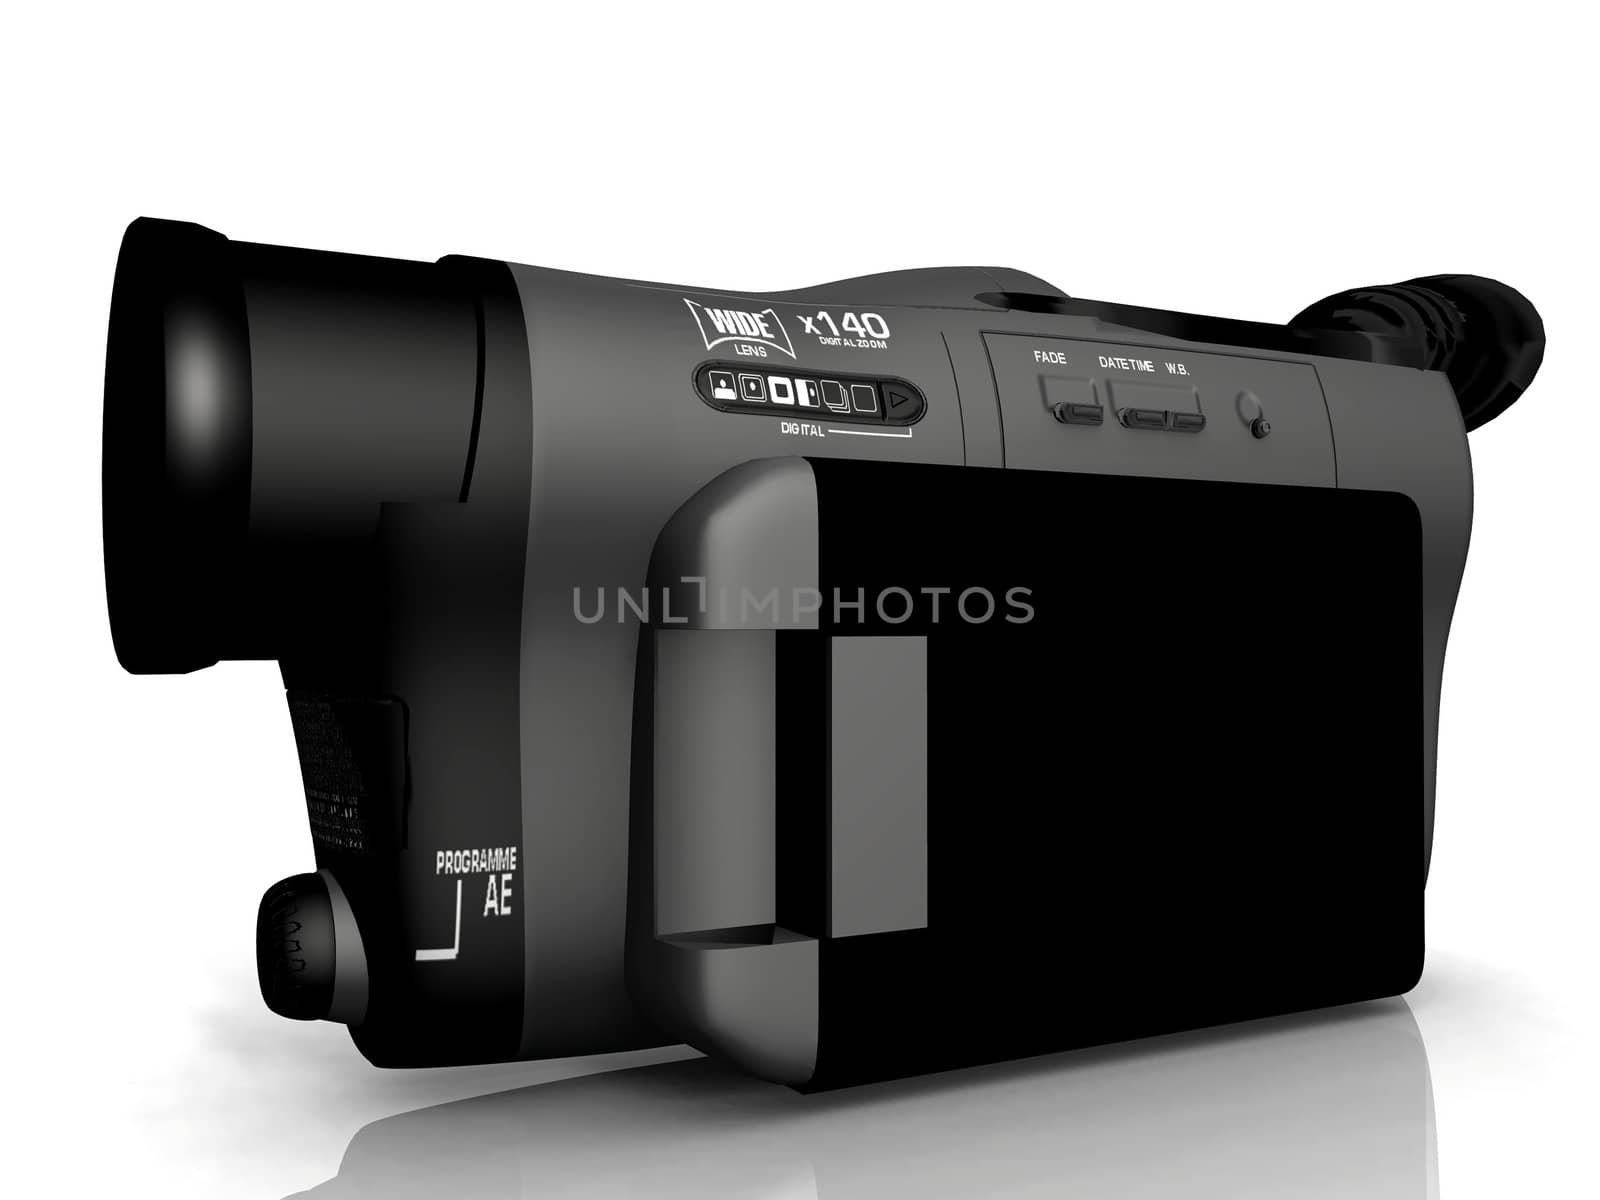 the camcorder by njaj